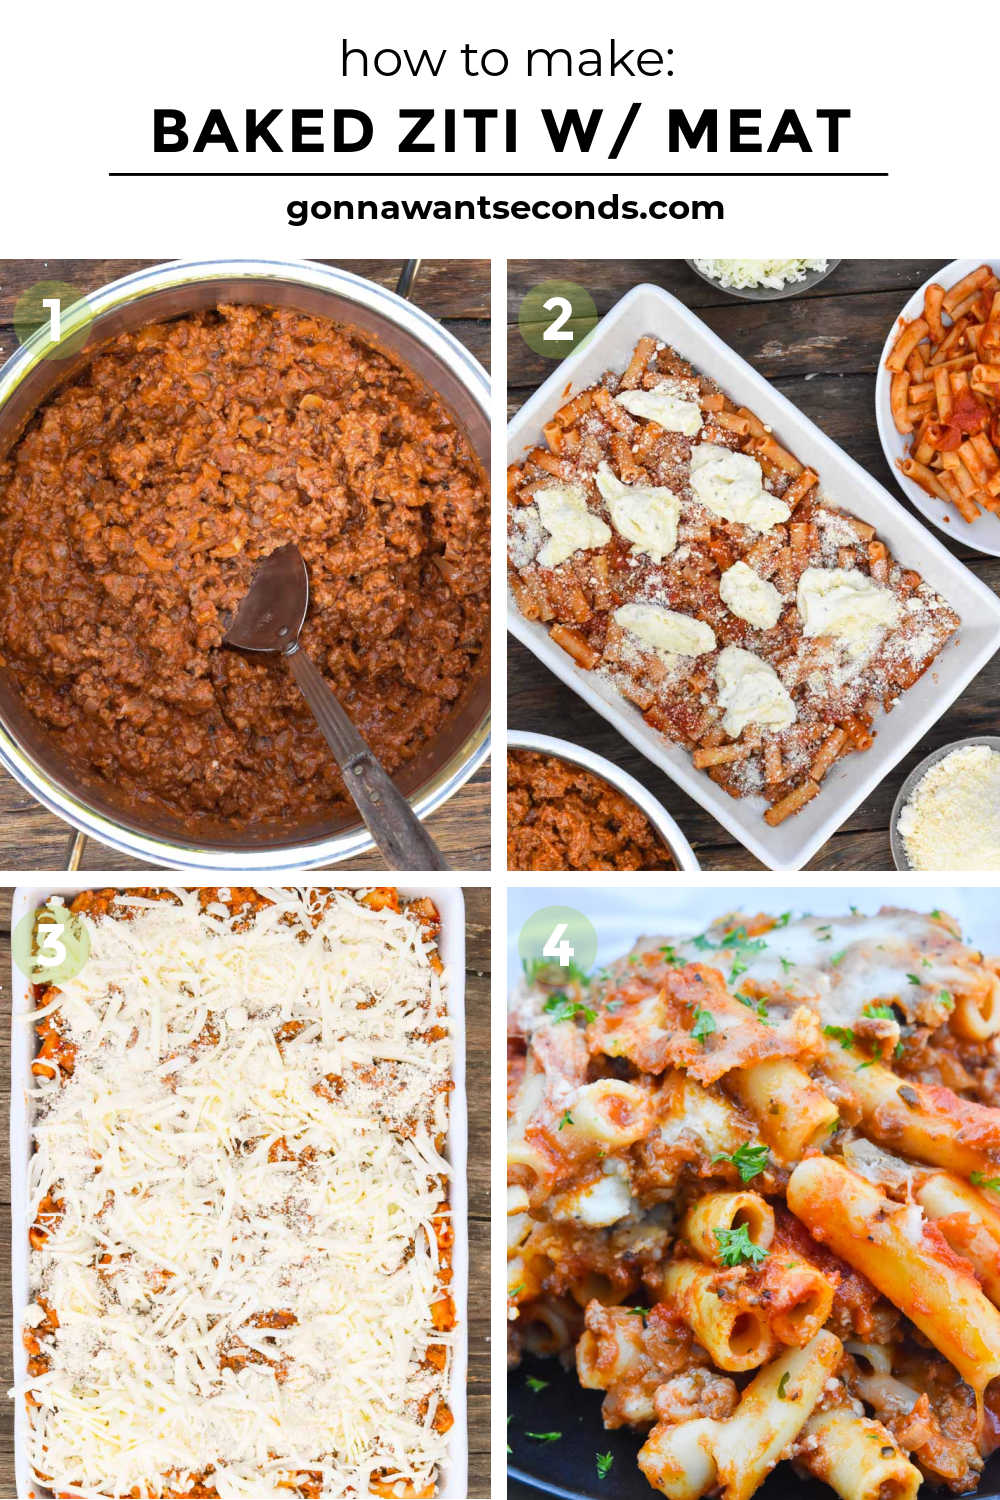 Step by step how to make Baked Ziti With Meat